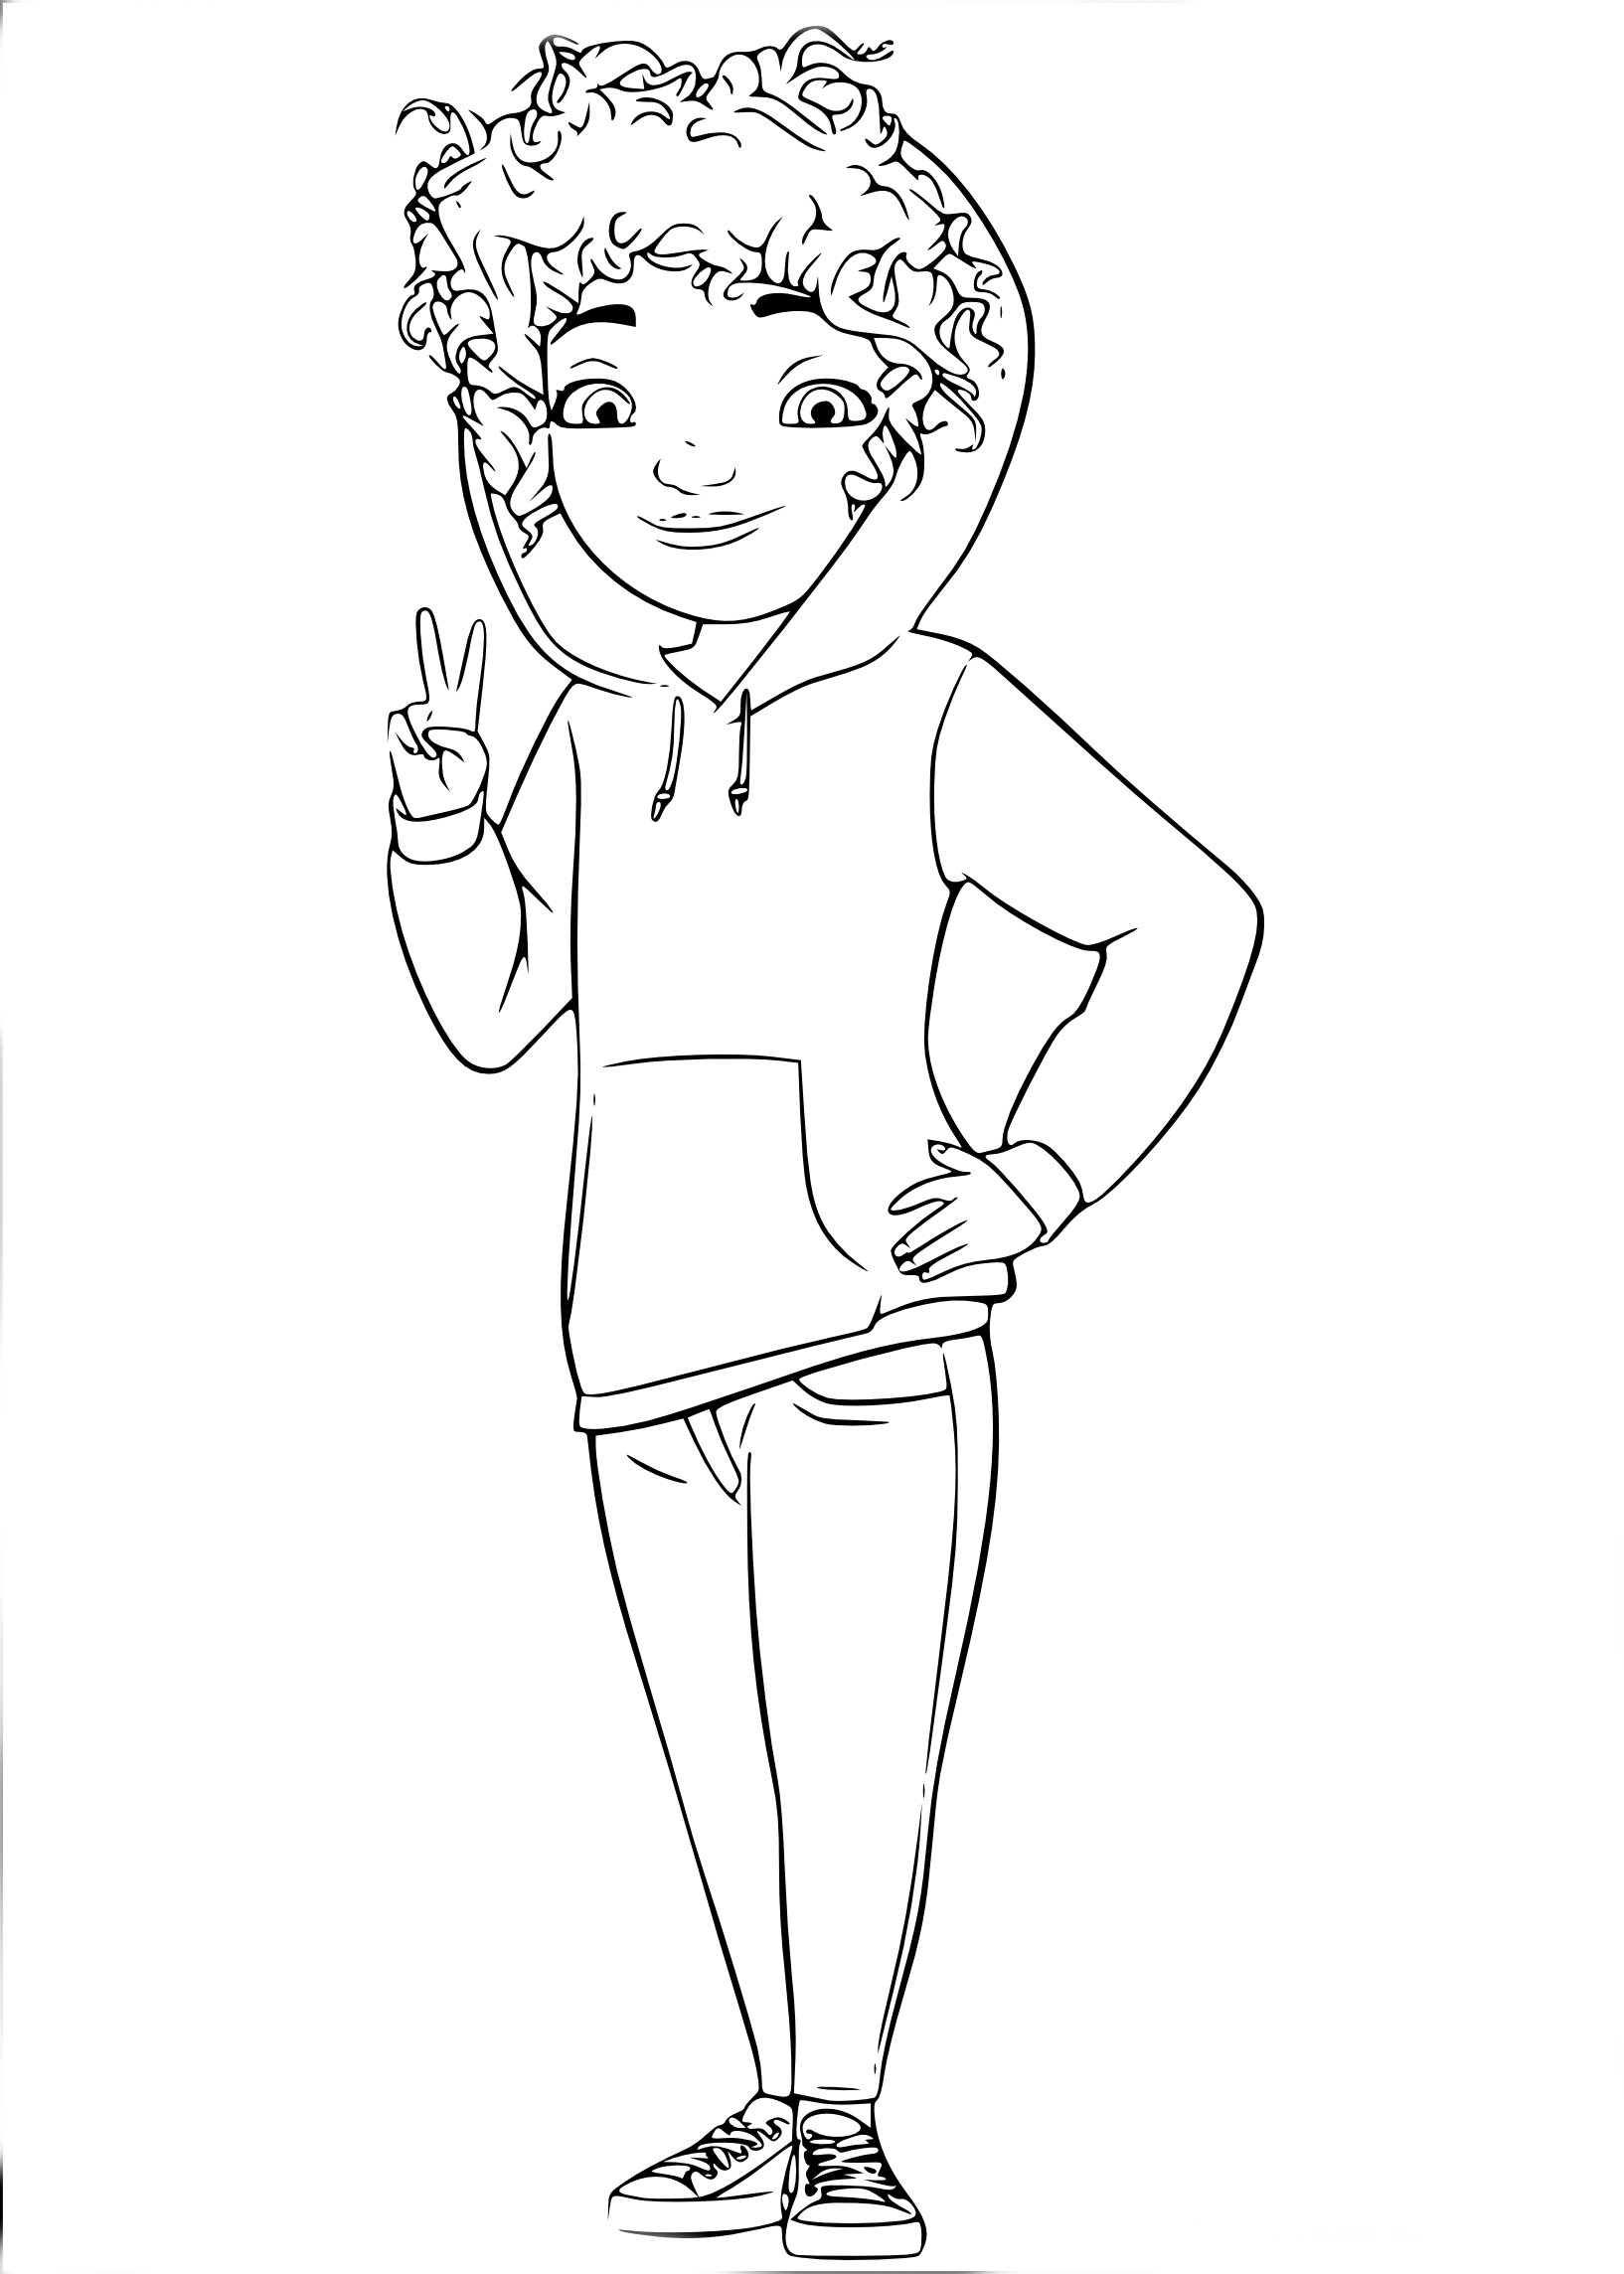 Tif On The Way coloring page